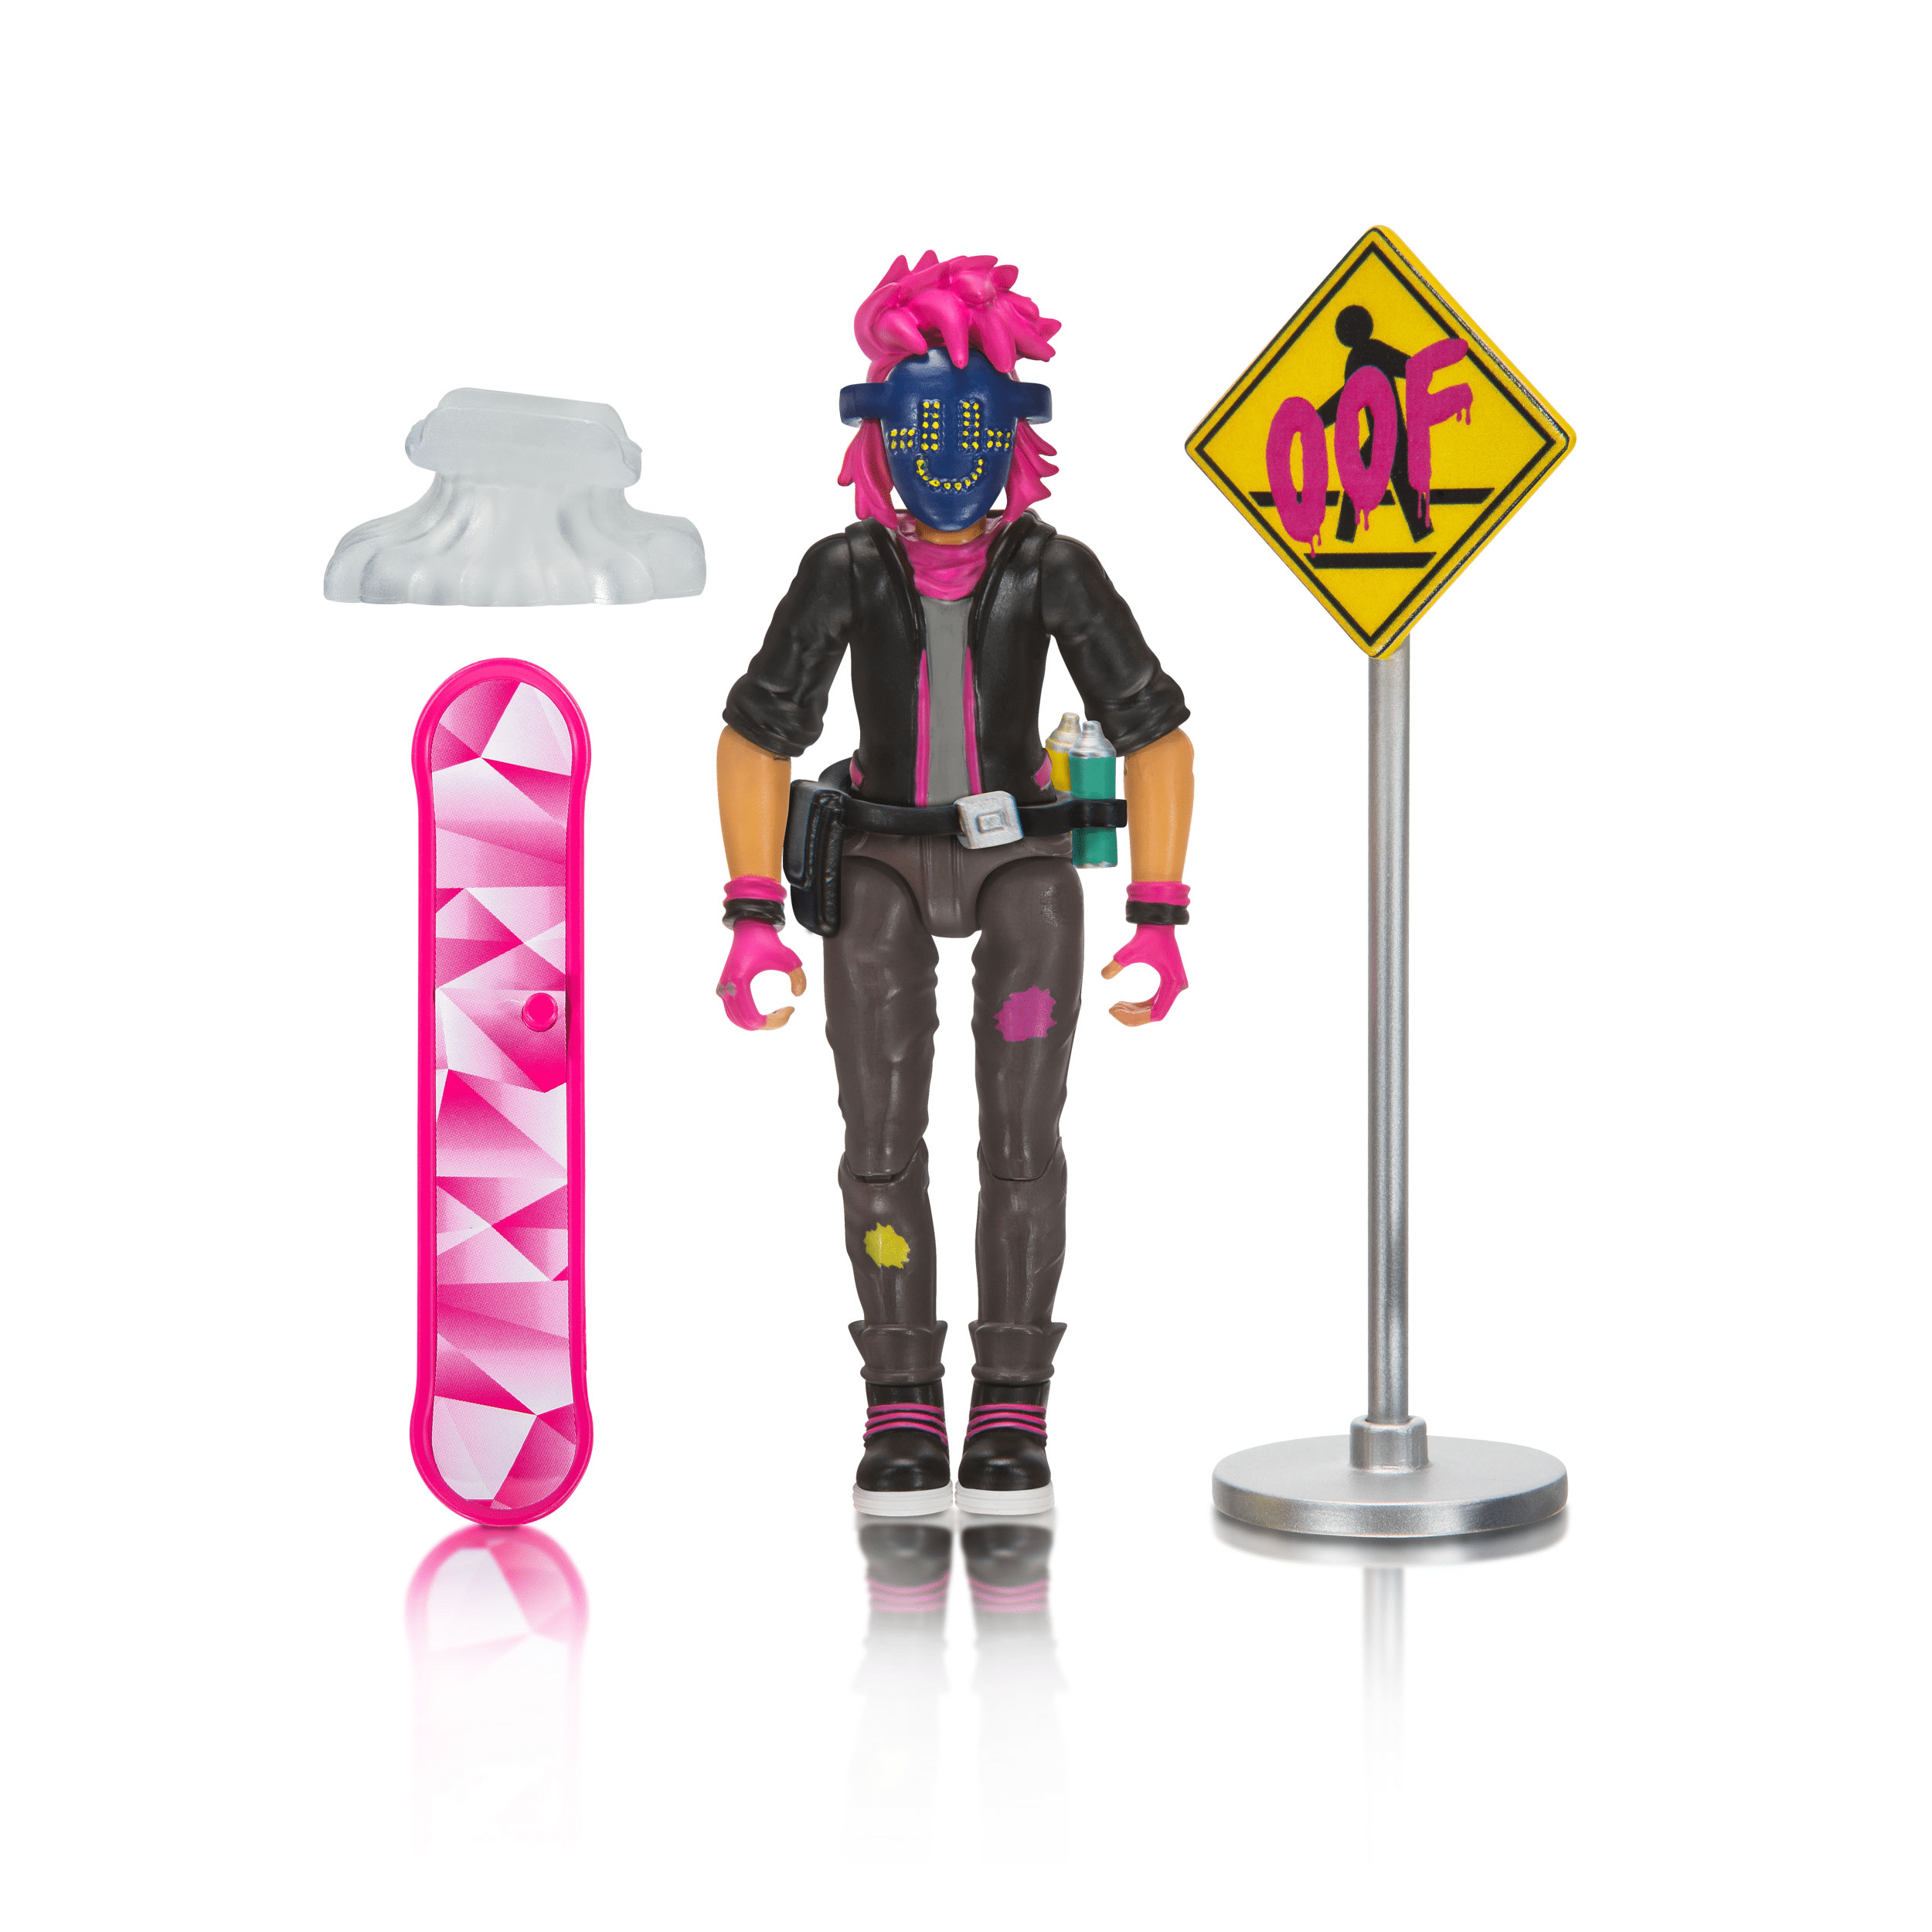 Roblox Imagination Collection Digital Artist Figure Pack Includes Exclusive Virtual Item Walmart Com Walmart Com - digital art of your roblox character